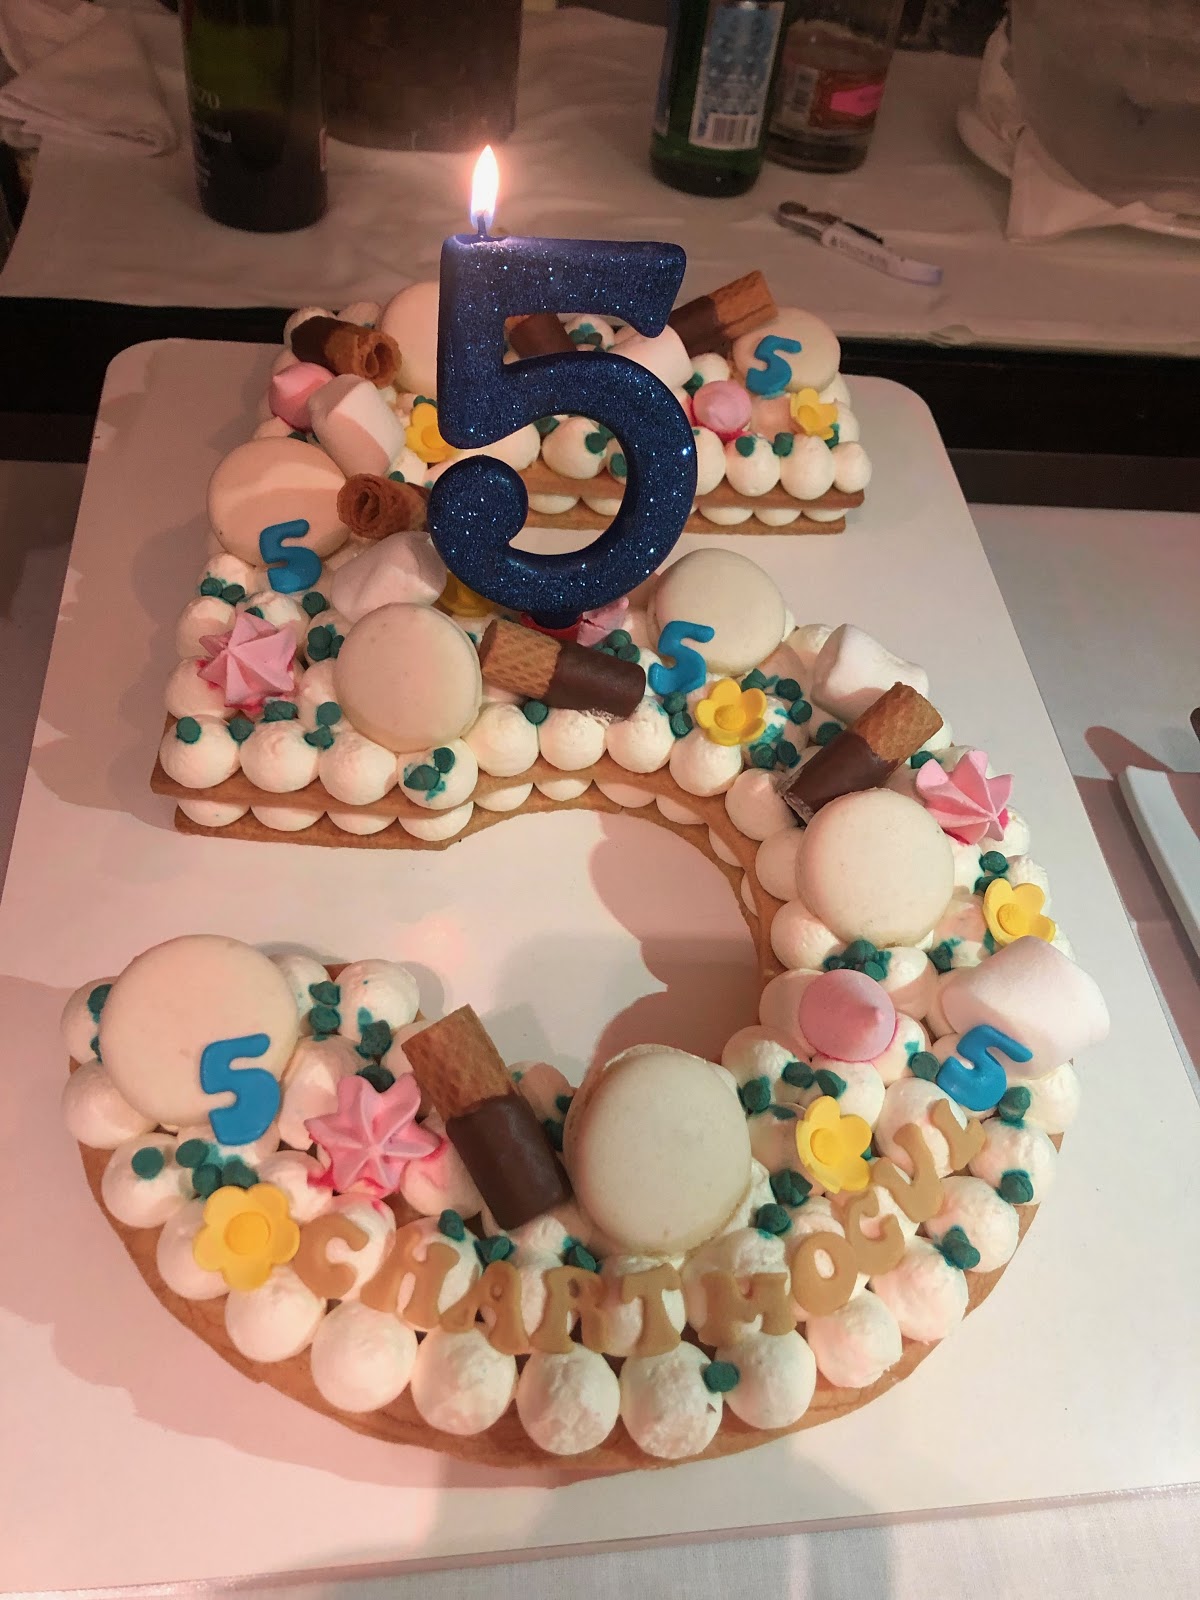 The cake for ChartMogul's 5th birthday